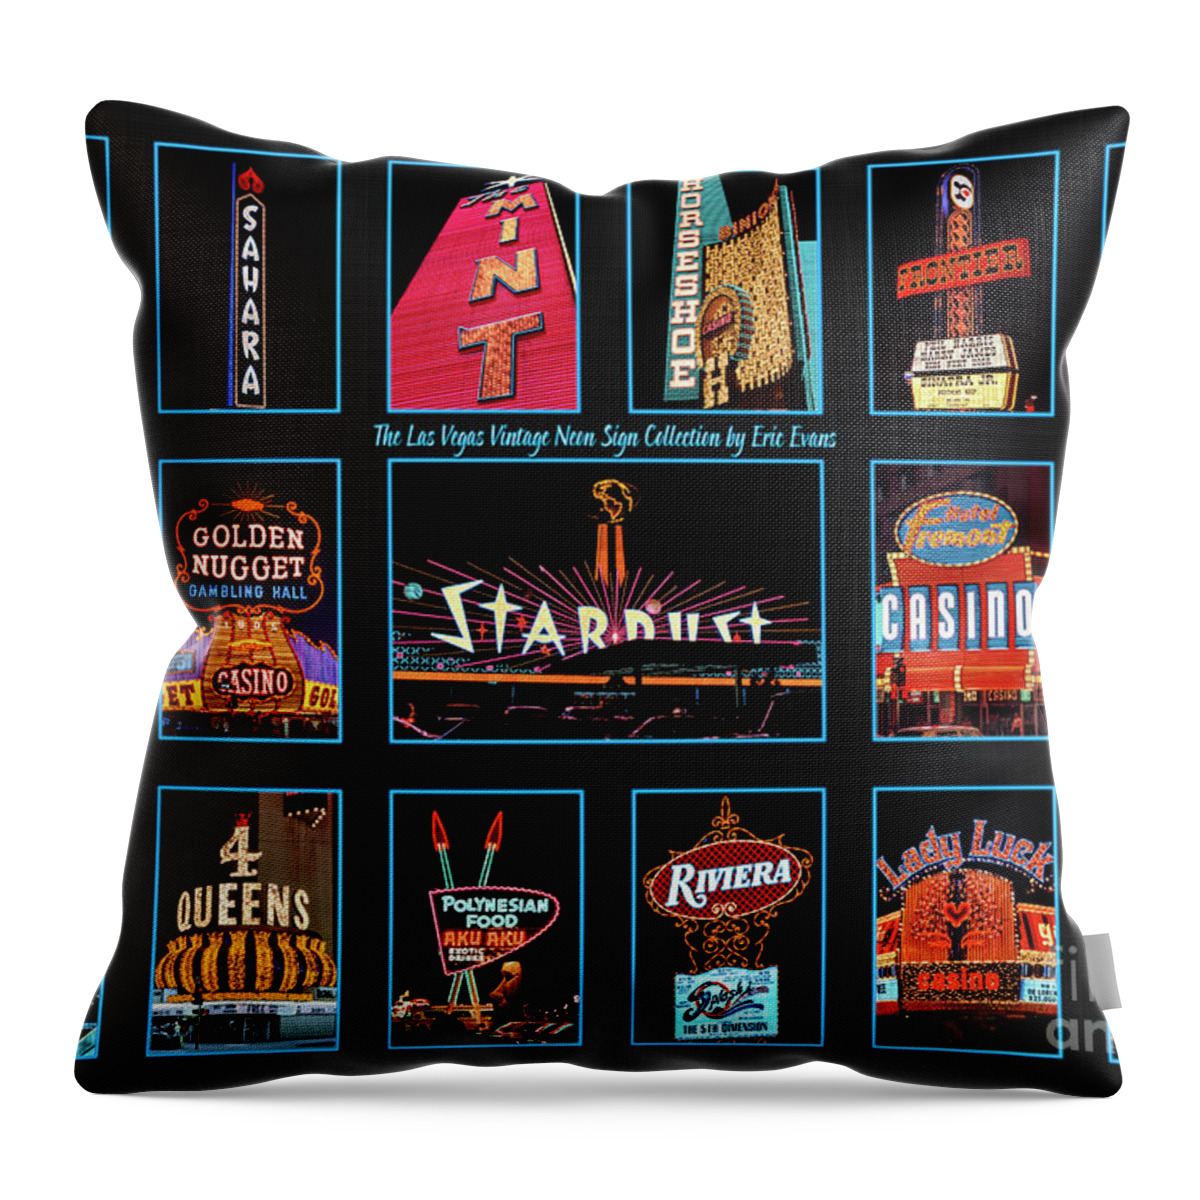 Las Vegas Neon Signs Throw Pillow featuring the photograph Las Vegas Vintage Neon Signs Collection Slides Featuring The Stardust Casino by Aloha Art